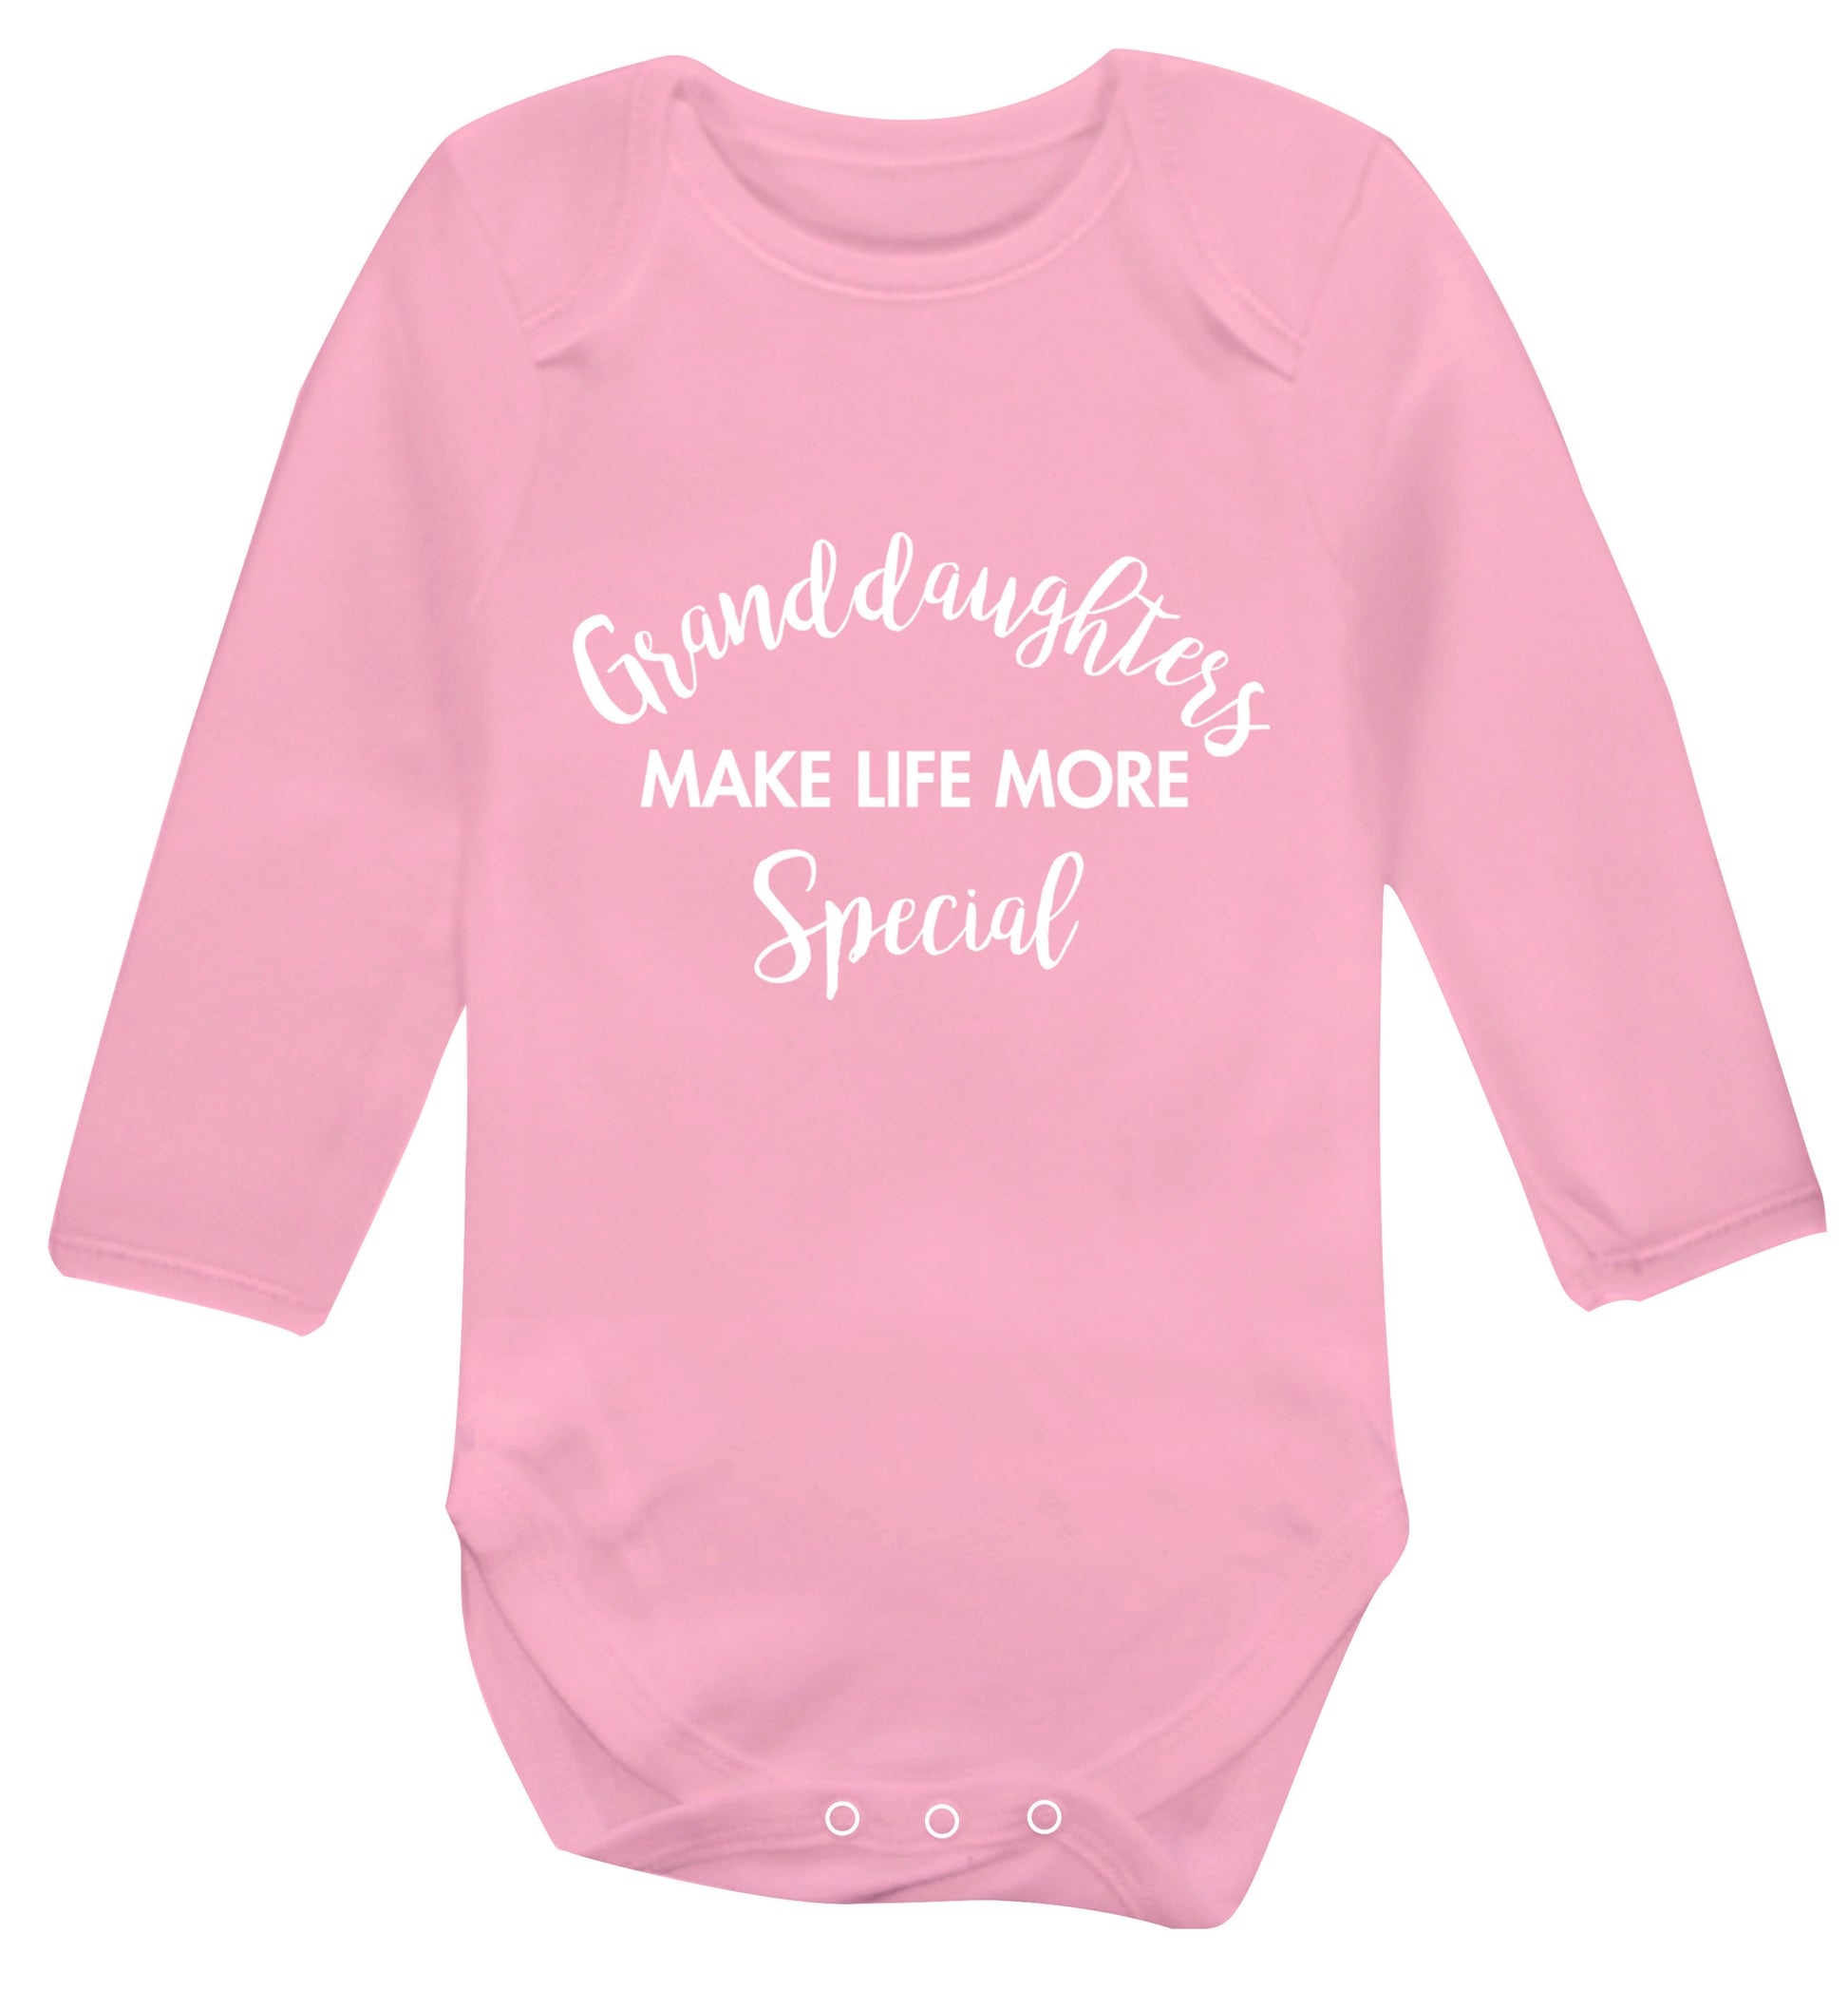 Granddaughters make life more special Baby Vest long sleeved pale pink 6-12 months